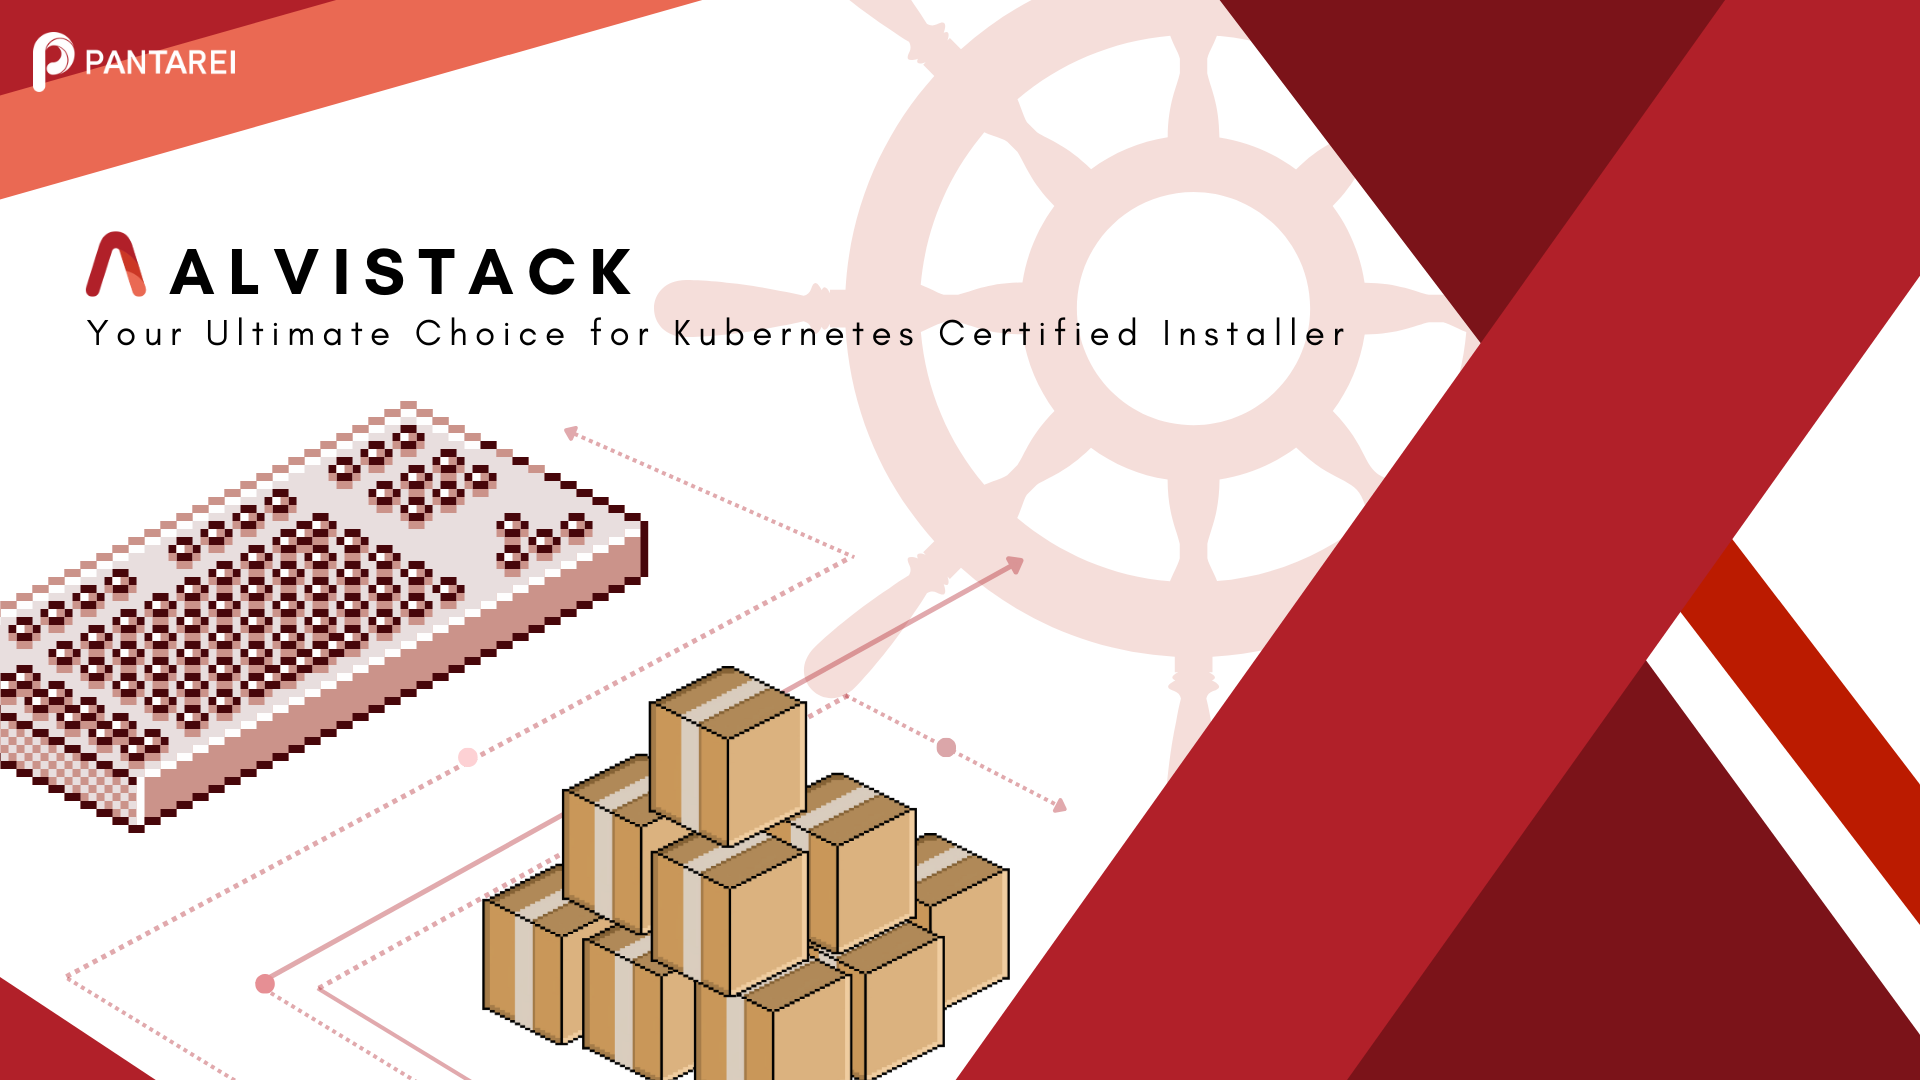 Thumbnial of "Alvistack – Your Ultimate Choice for Kubernetes Certified Installer"